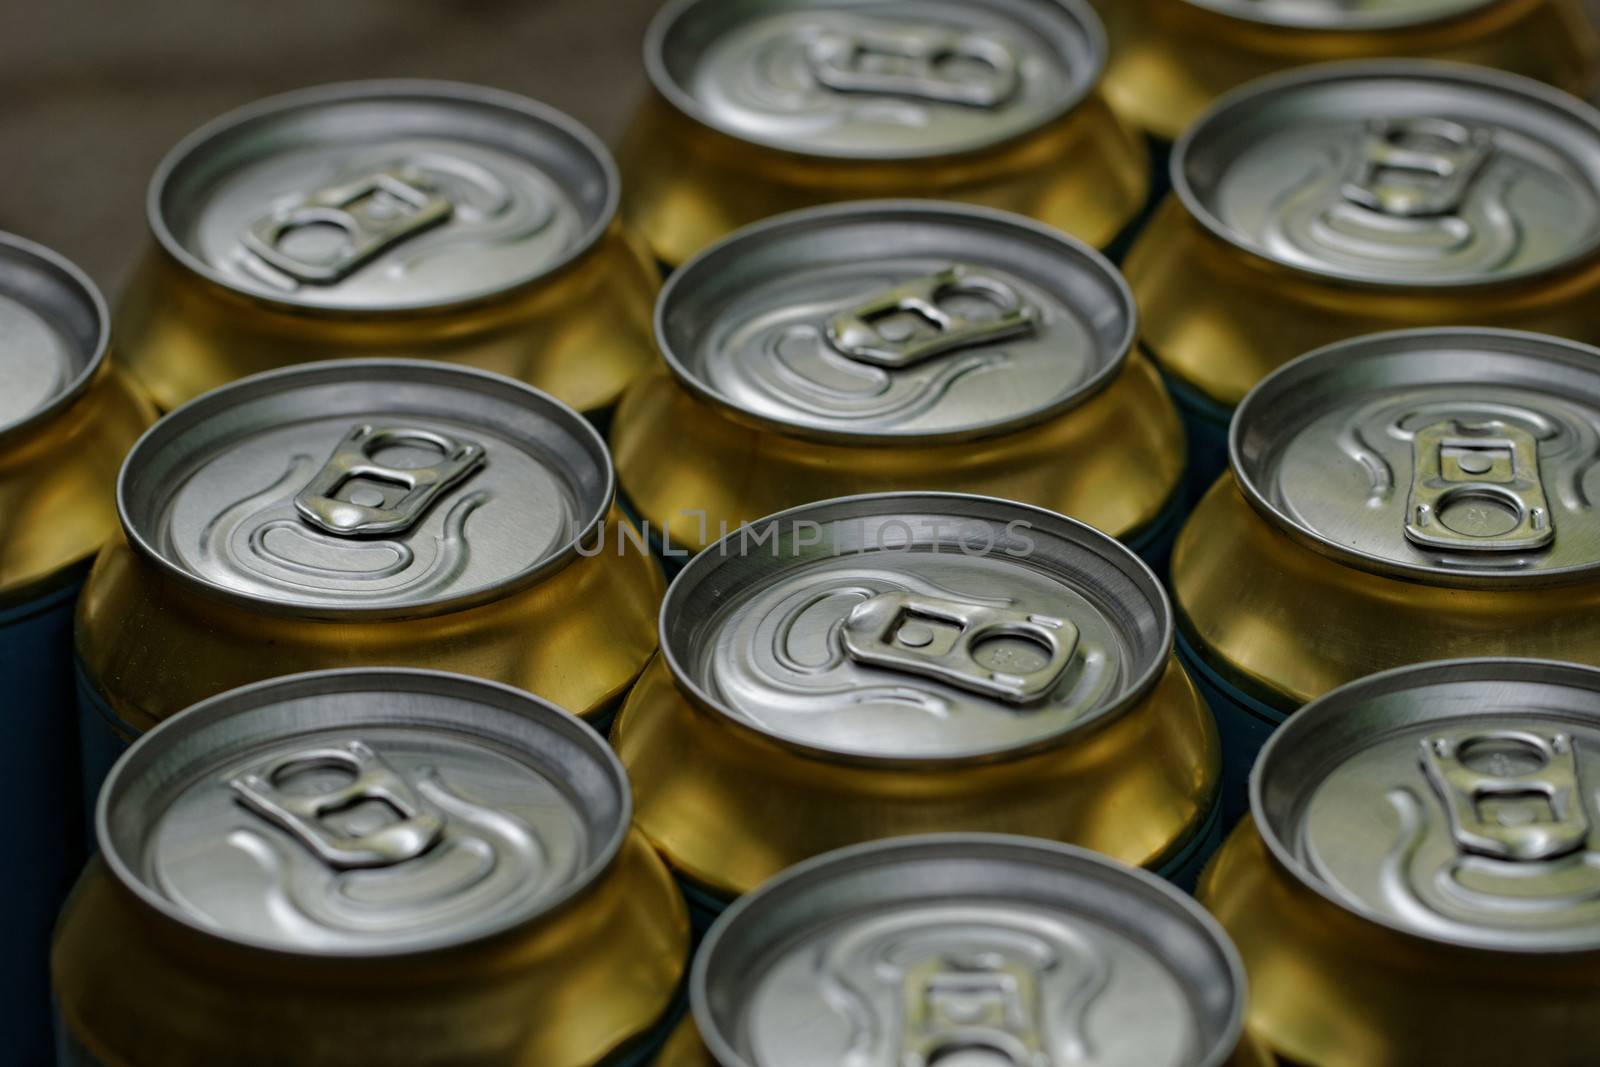 Much of drinking cans close up